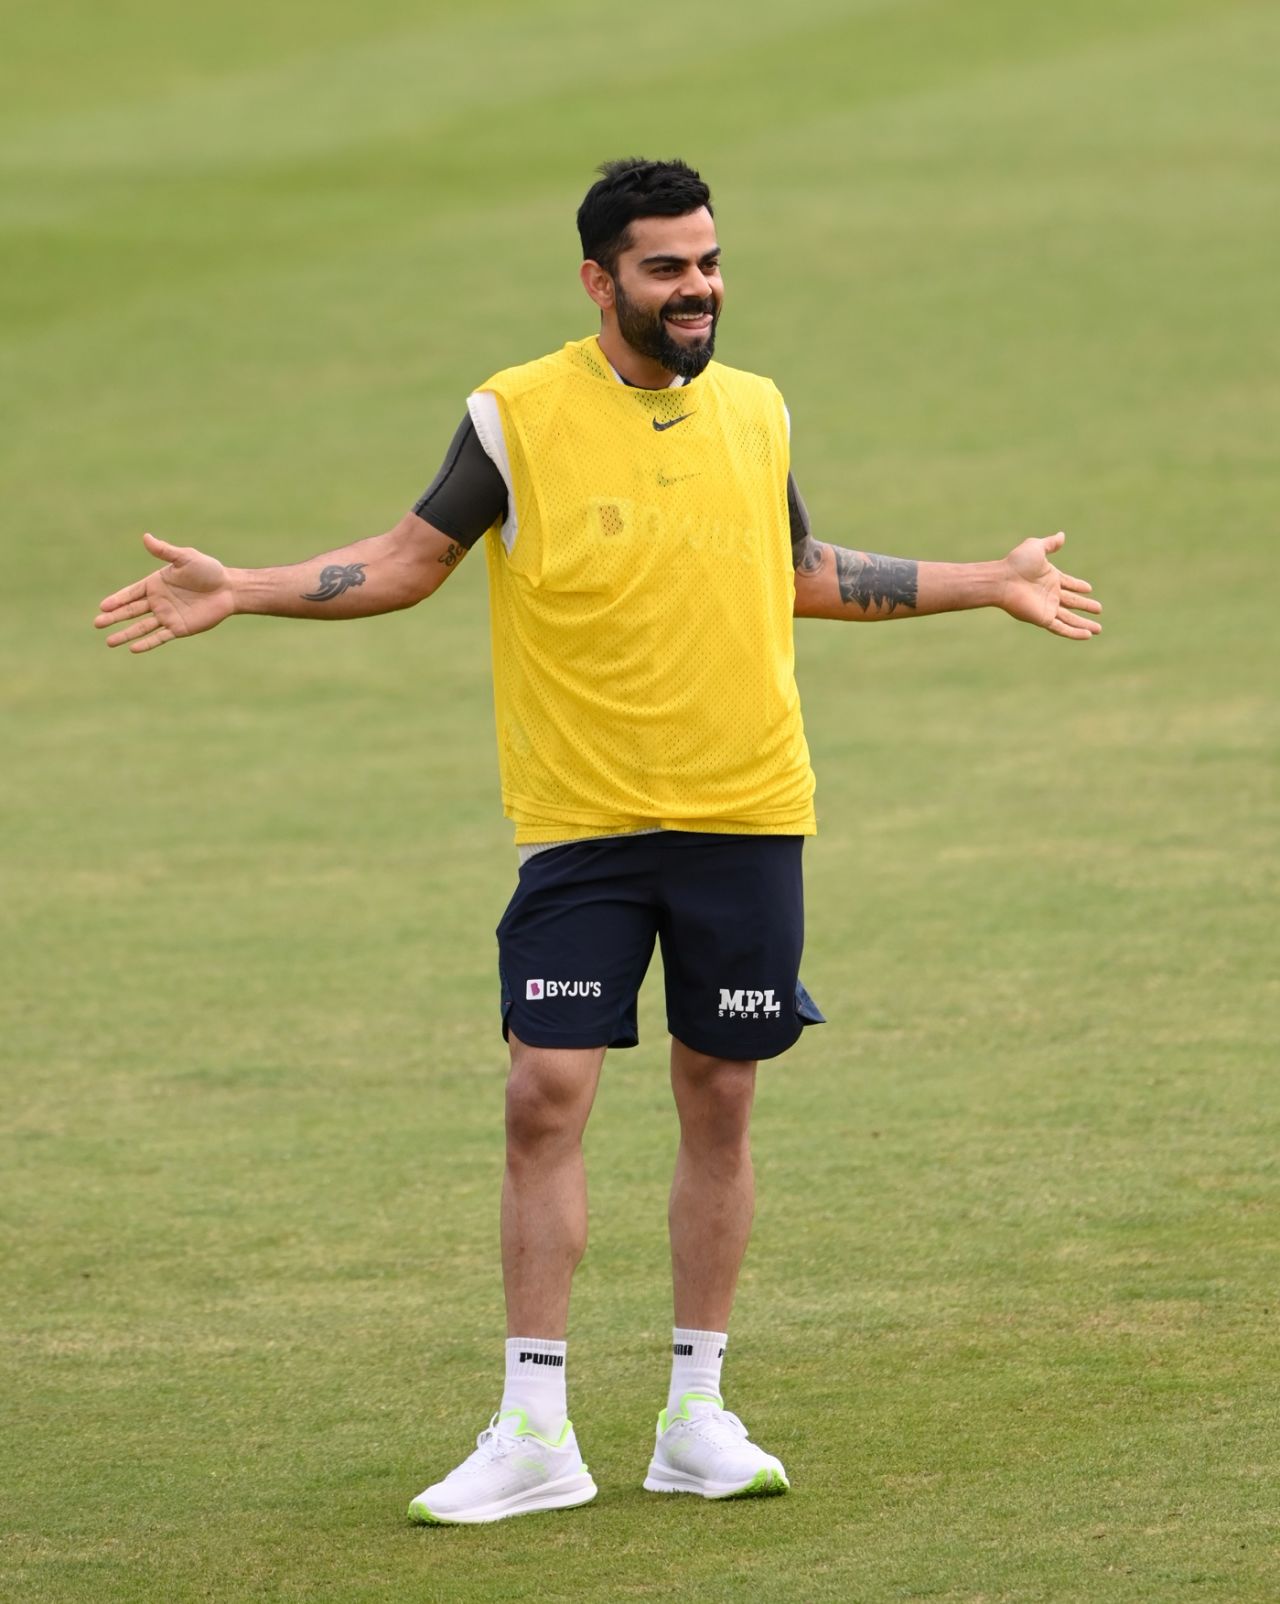 Virat Kohli finds a reason to smile during training, August 2, 2021